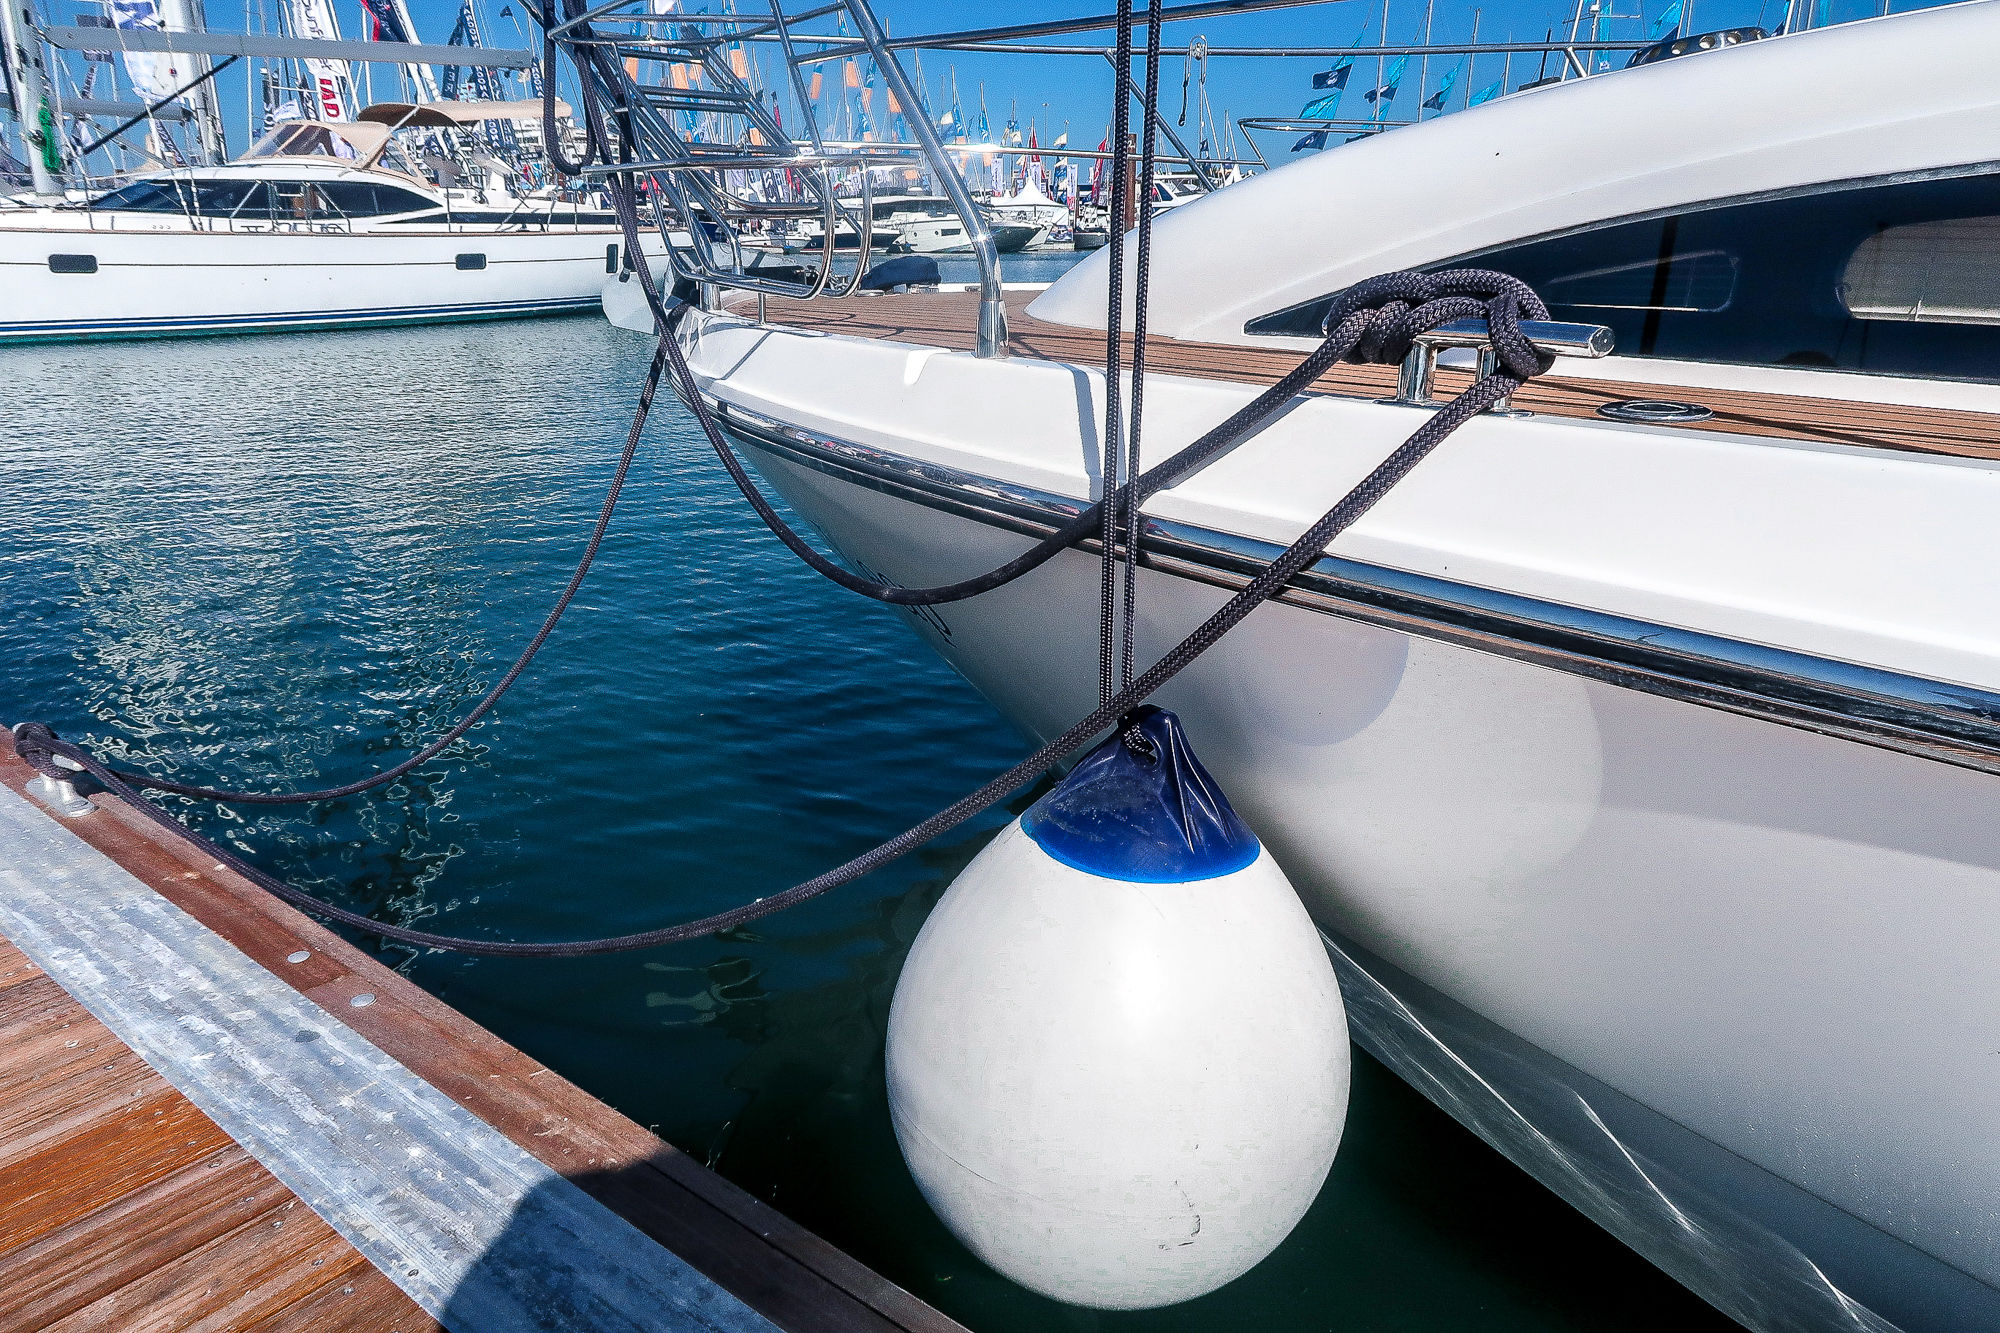 Southampton Boat Show: How To Get Discounted Tickets 46